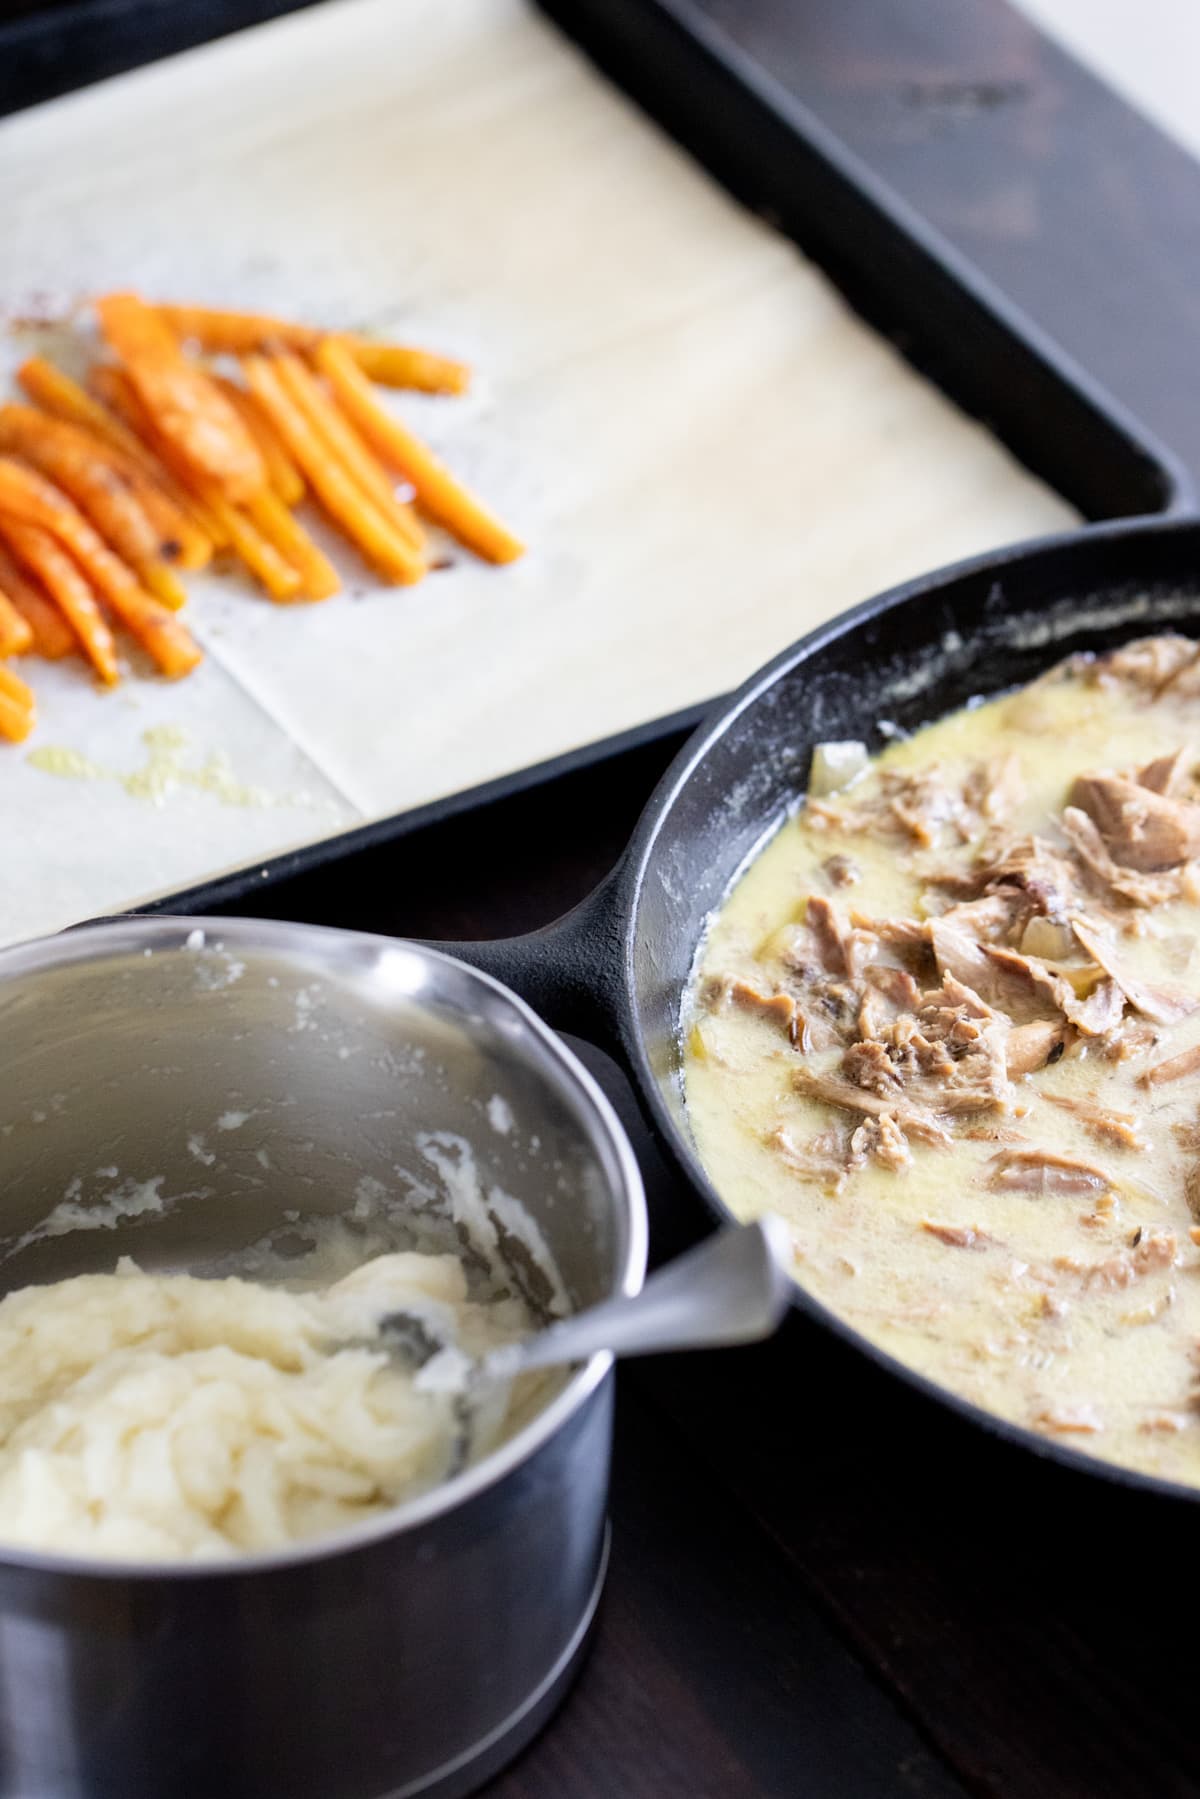 mashed potatoes, carrots, and rabbit meat